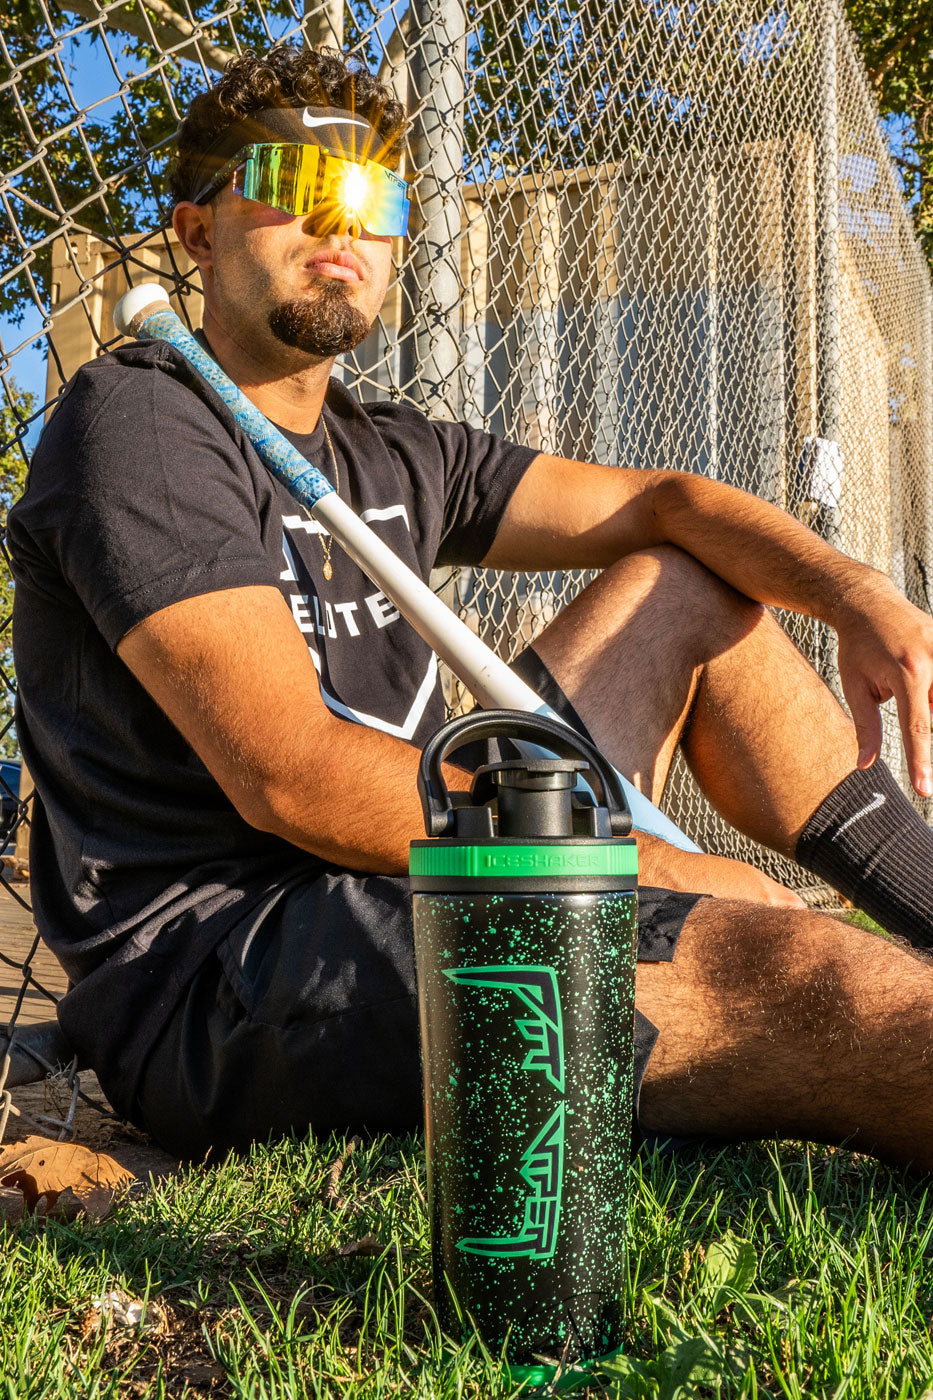 This image shows a young, hispanic man sitting up against a chain-linked fence. The sun is shining bright on him as he wears the Ice Shaker X Pit Viper Sun Glasses. He holds a baseball bat in his hand and next to him is the Custom Pit Viper 26oz Ice Shaker.